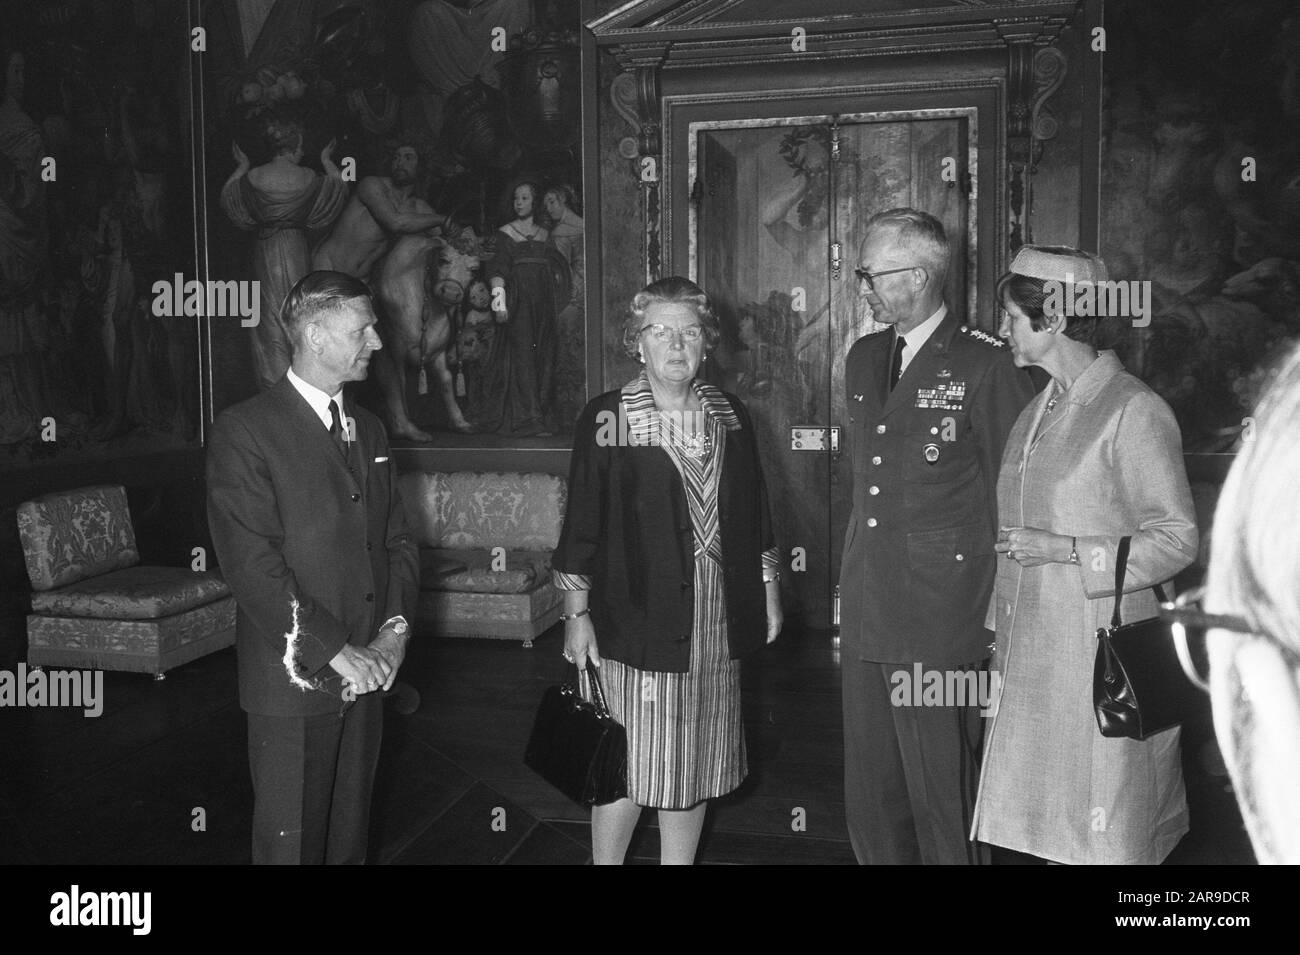 Queen Juliana receives General Goodpaster and his wife at Huis ten Bosch, The Hague  V.L.N.R. Minister of Defence Willem den Toom, Queen Juliana, General Andrew J. Goodpaster and Mrs. Goodpaster Date: 8 September 1969 Location: The Hague, Zuid-Holland Keywords: generals, queens, ministers, receipts Personal name: Goodpaster, Andrew Jackson, Juliana, queen, Toom, Willem den Institutionname: Huis Ten Bosch Stock Photo